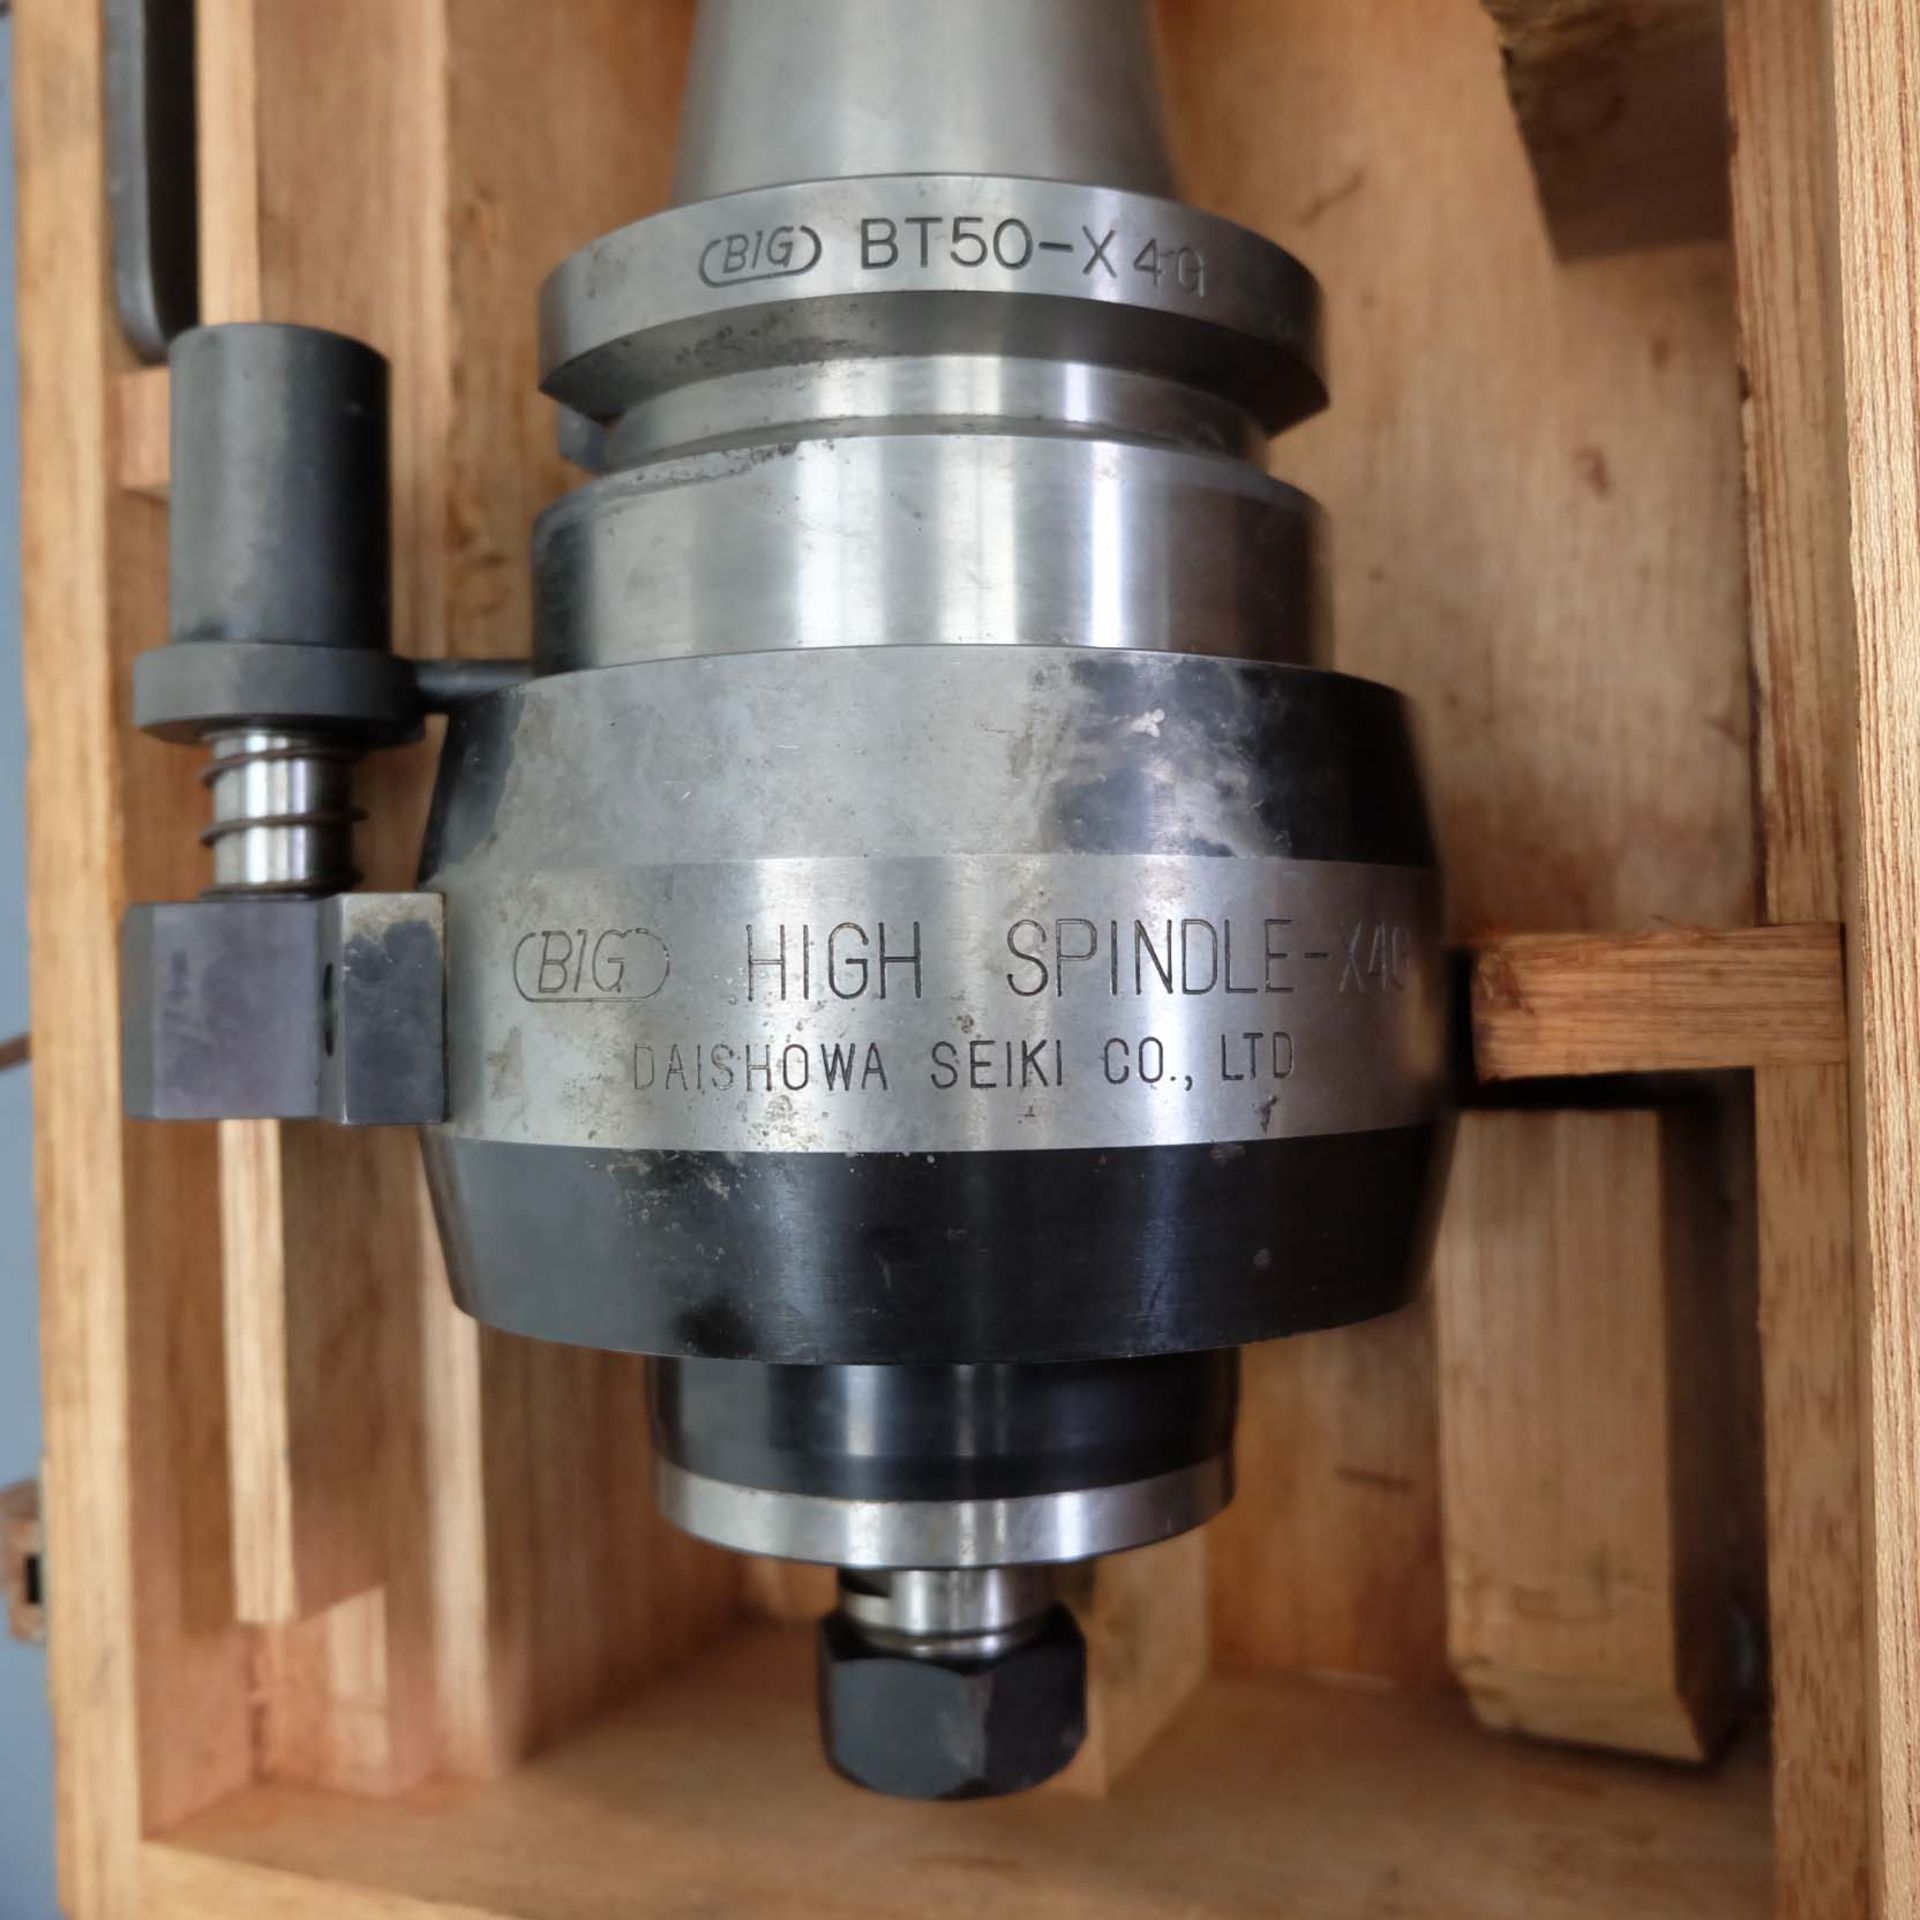 B I G High Spindle - X4G Speed Increaser by Daishower Seiki Co Ltd. With BT50 Spindle. In Wooden Box - Image 2 of 5